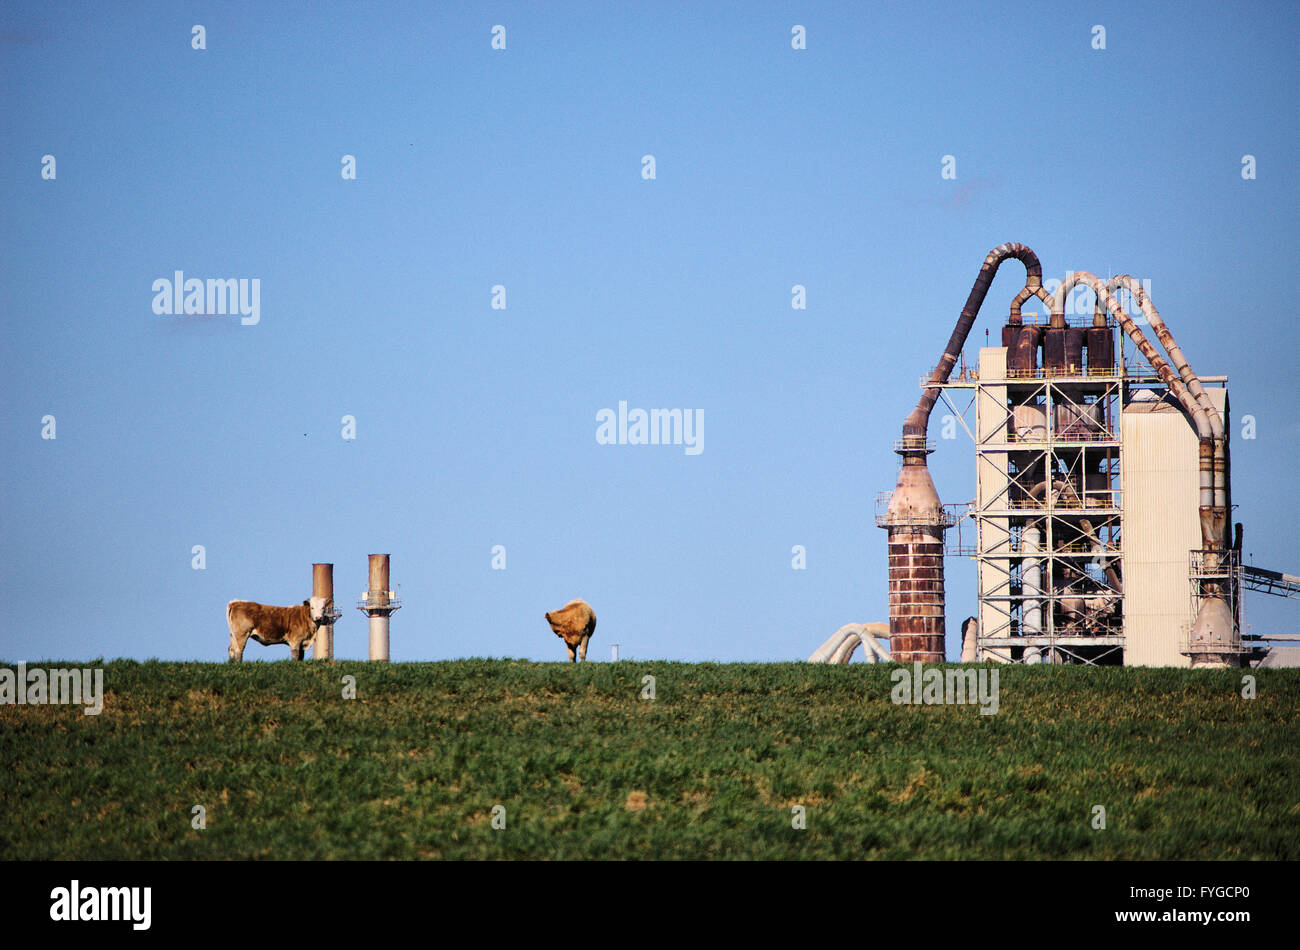 Cows grazing near a cement factory in Buda, TX Stock Photo